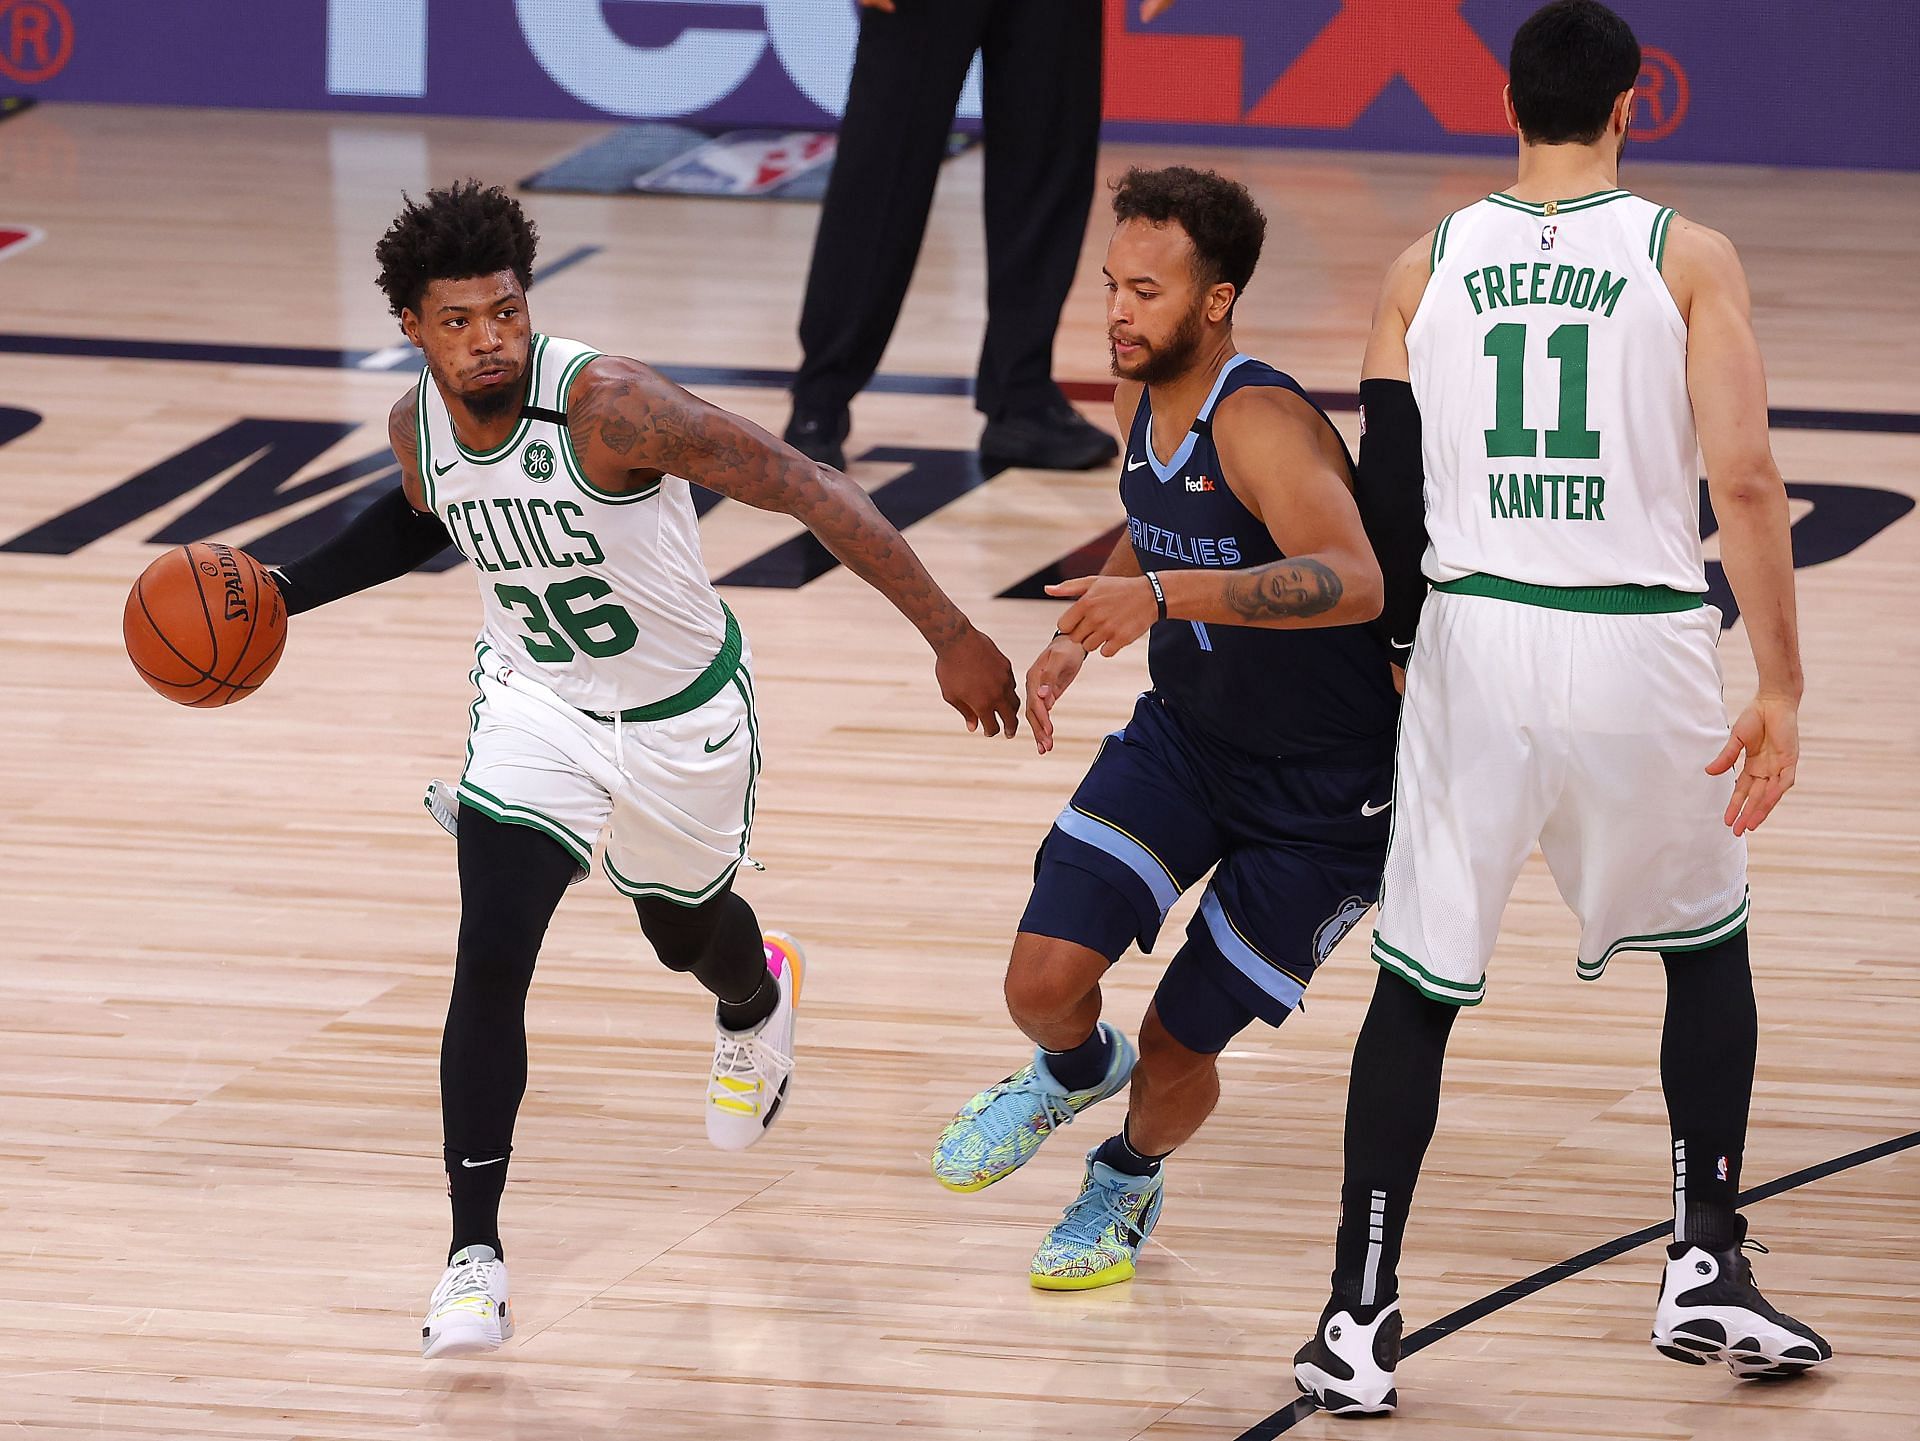 The Grizzlies will face off against the Celtics on Thursday for the first time this season.